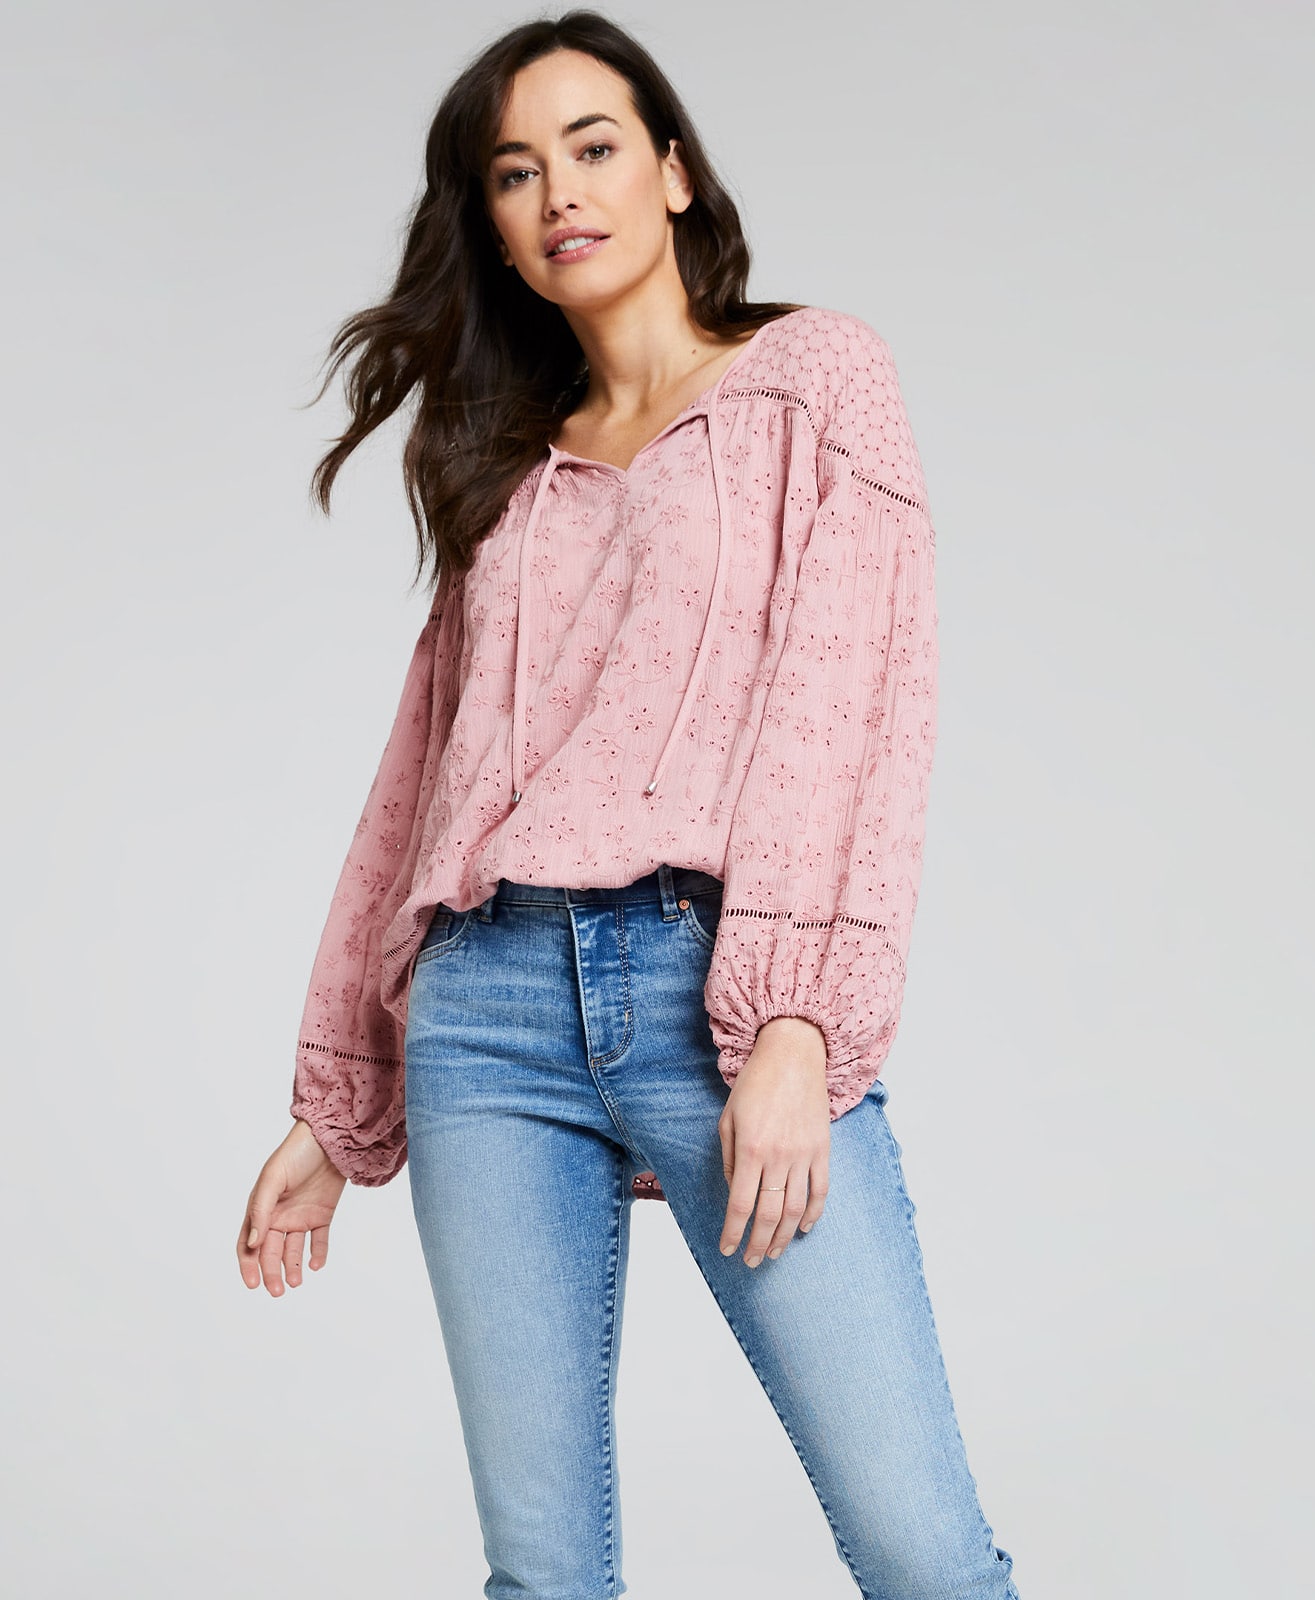 Tops - The Sleeve Detail Trend | Just Jeans™ Online